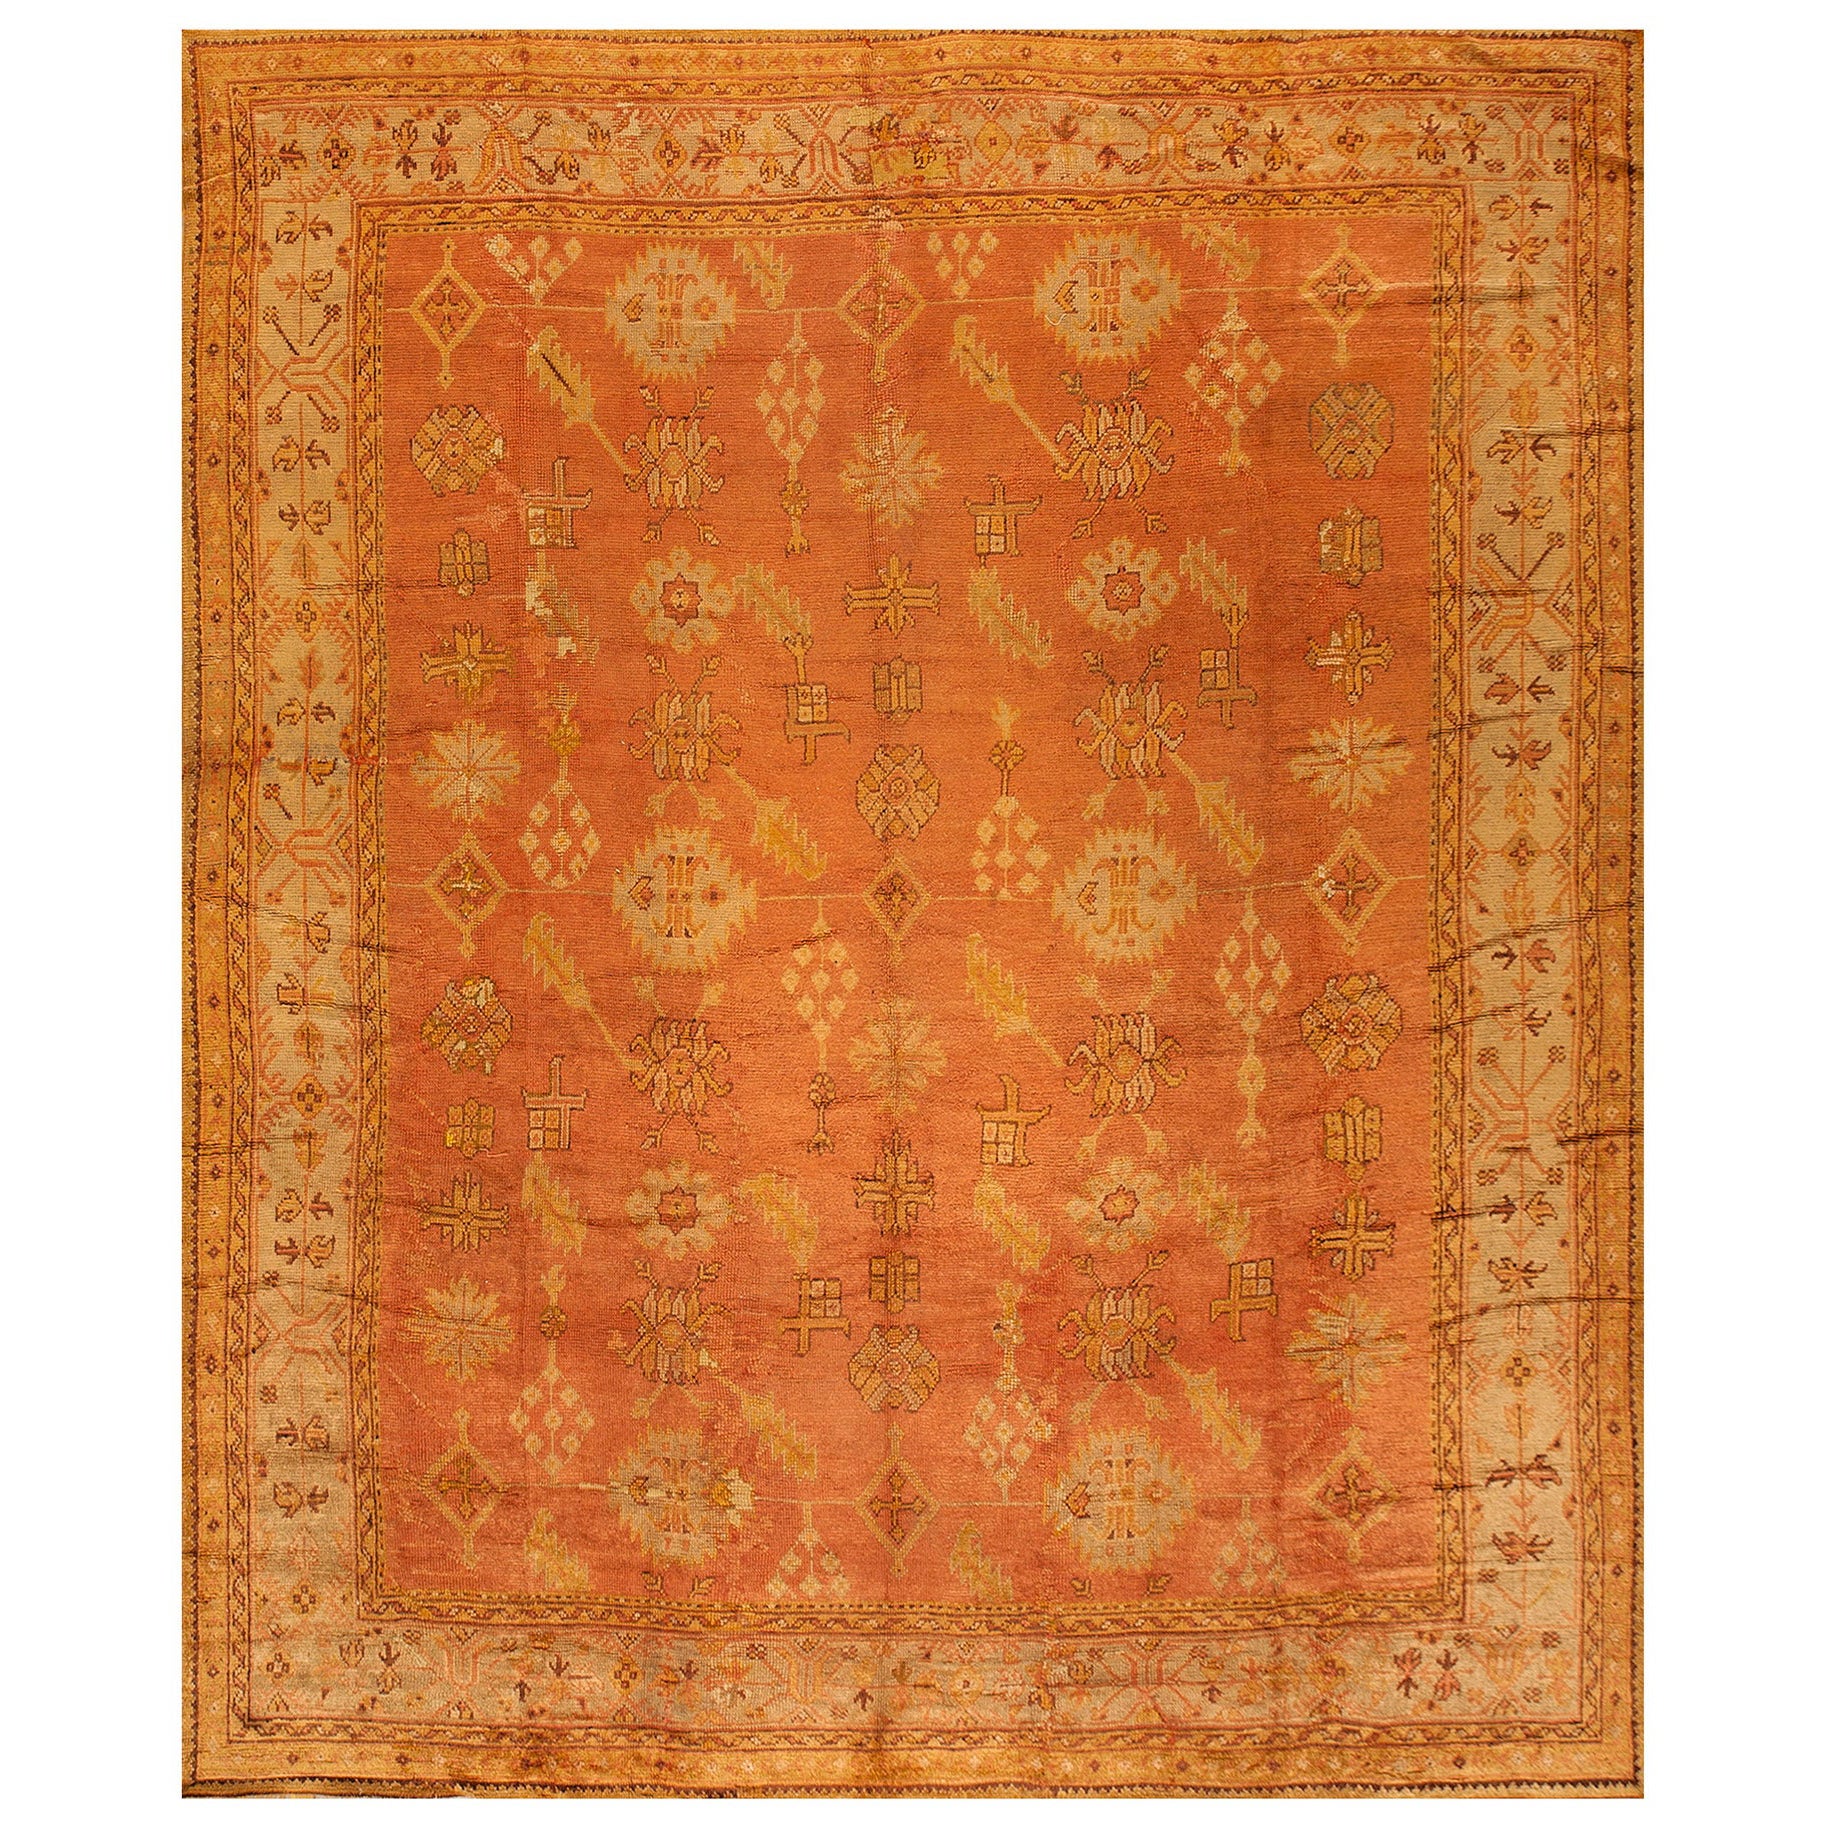 Early 20th Century Turkish Oushak Carpet ( 10'5'' x 12'6'' - 318 x 382 ) For Sale